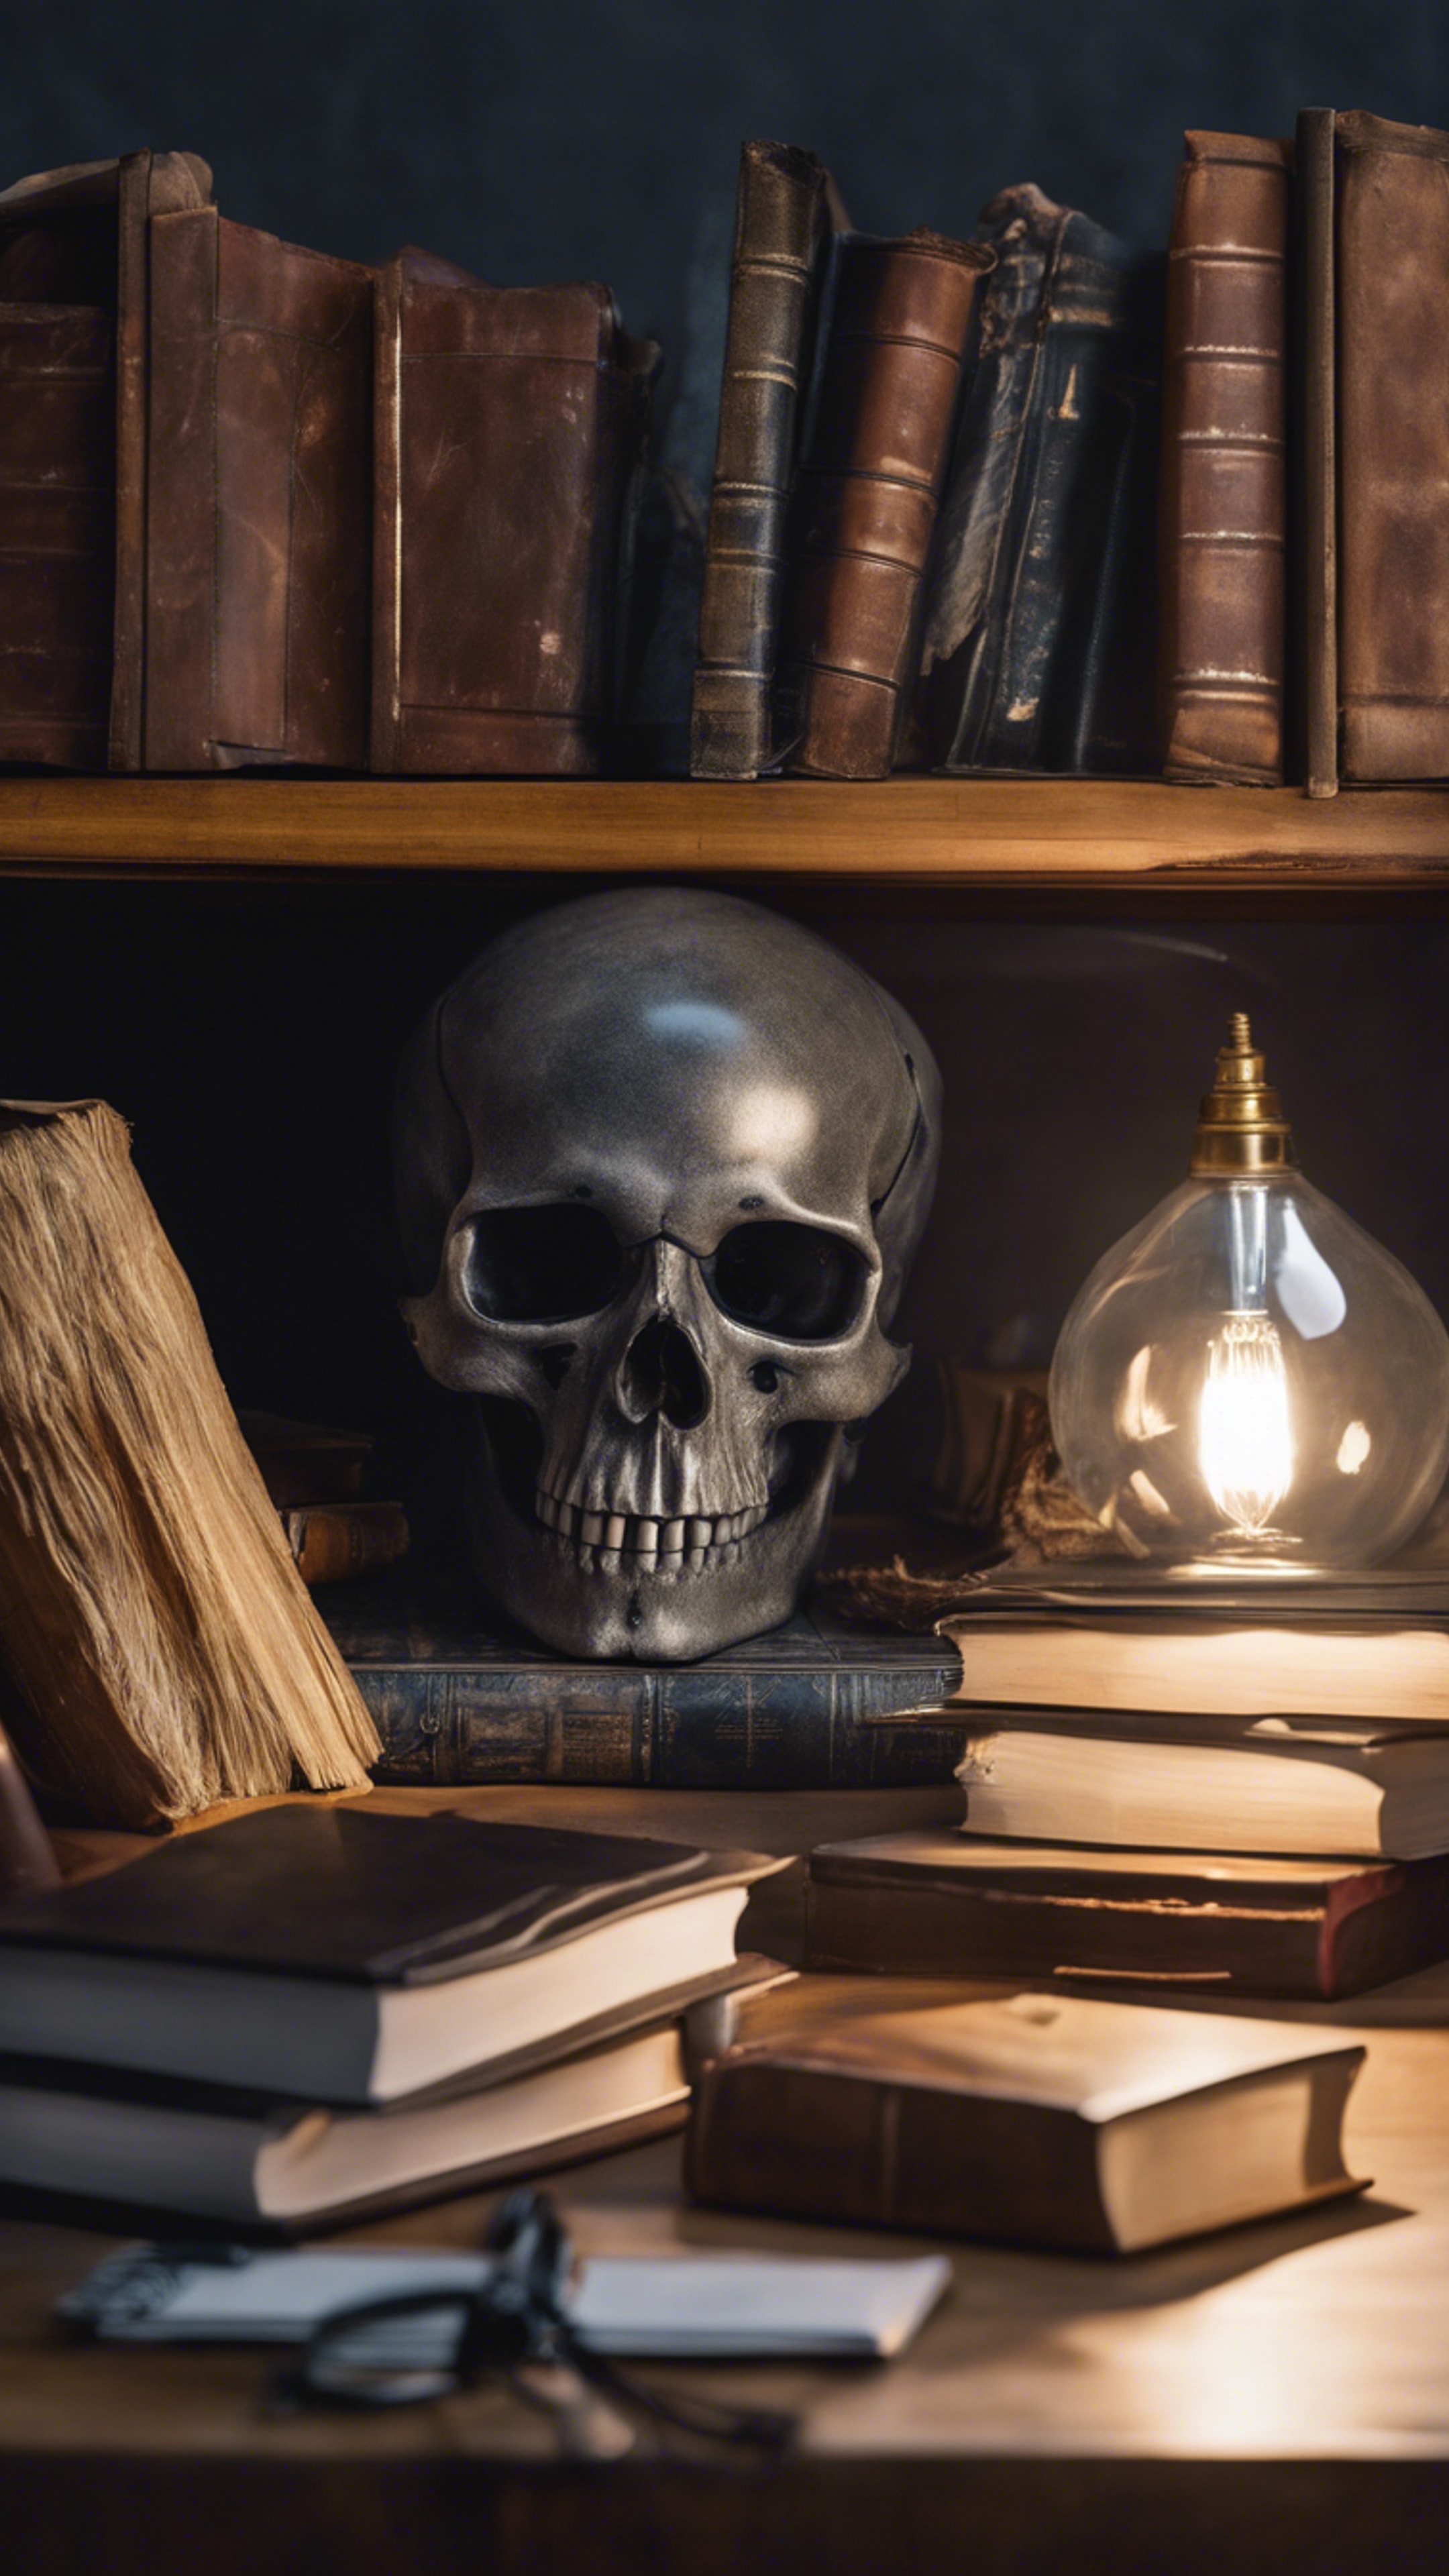 A study desk with a gray skull paperweight, surrounded by scattered books and a dimly lit lamp. ផ្ទាំង​រូបភាព[9ada7a5adc764debb4f2]